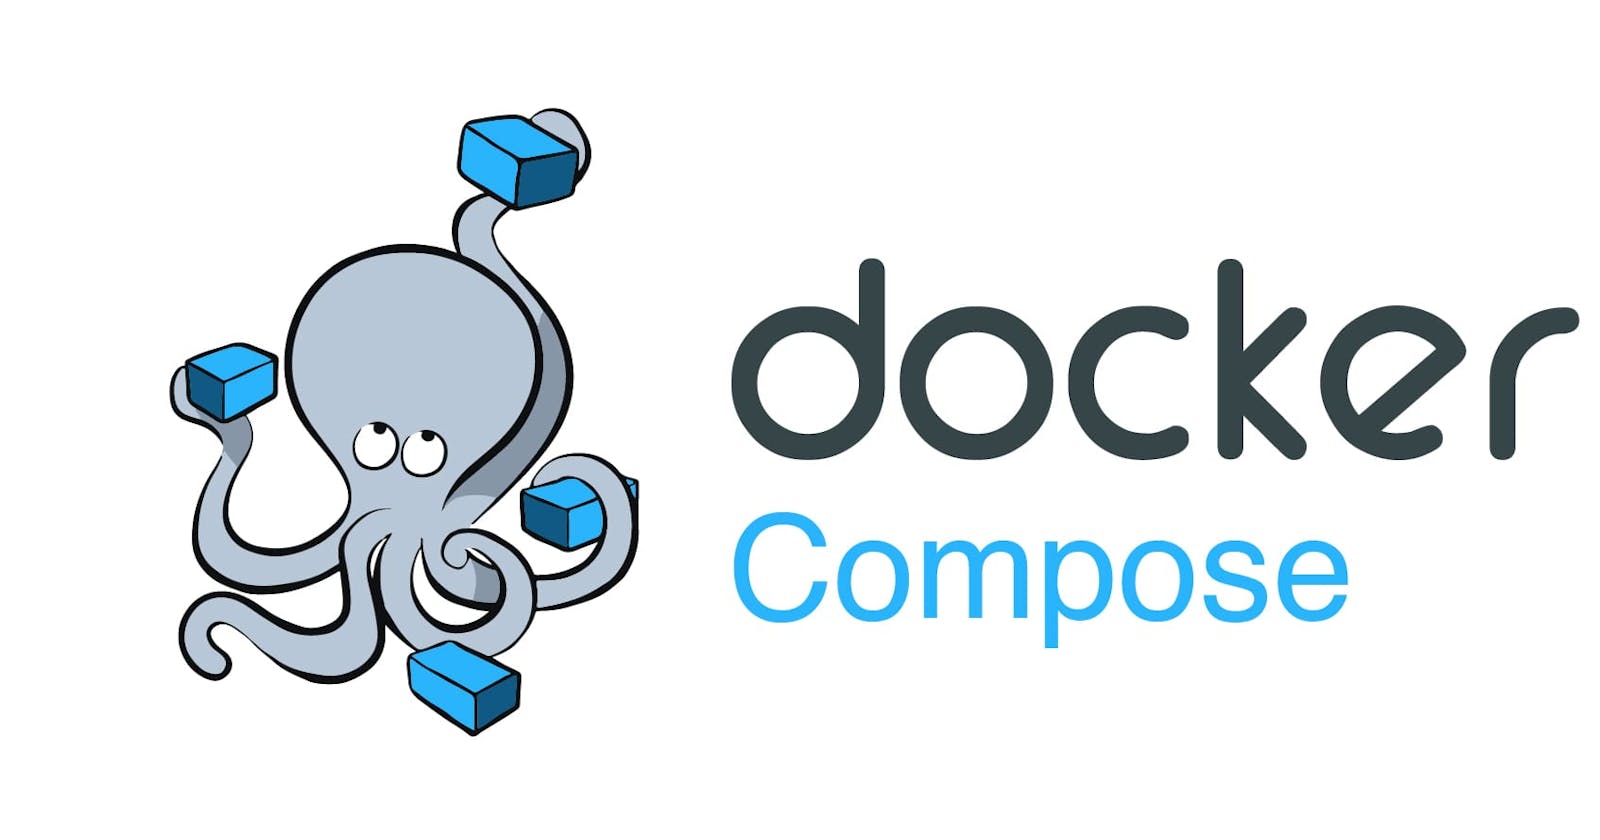 Running Multiple Containers With Docker Compose